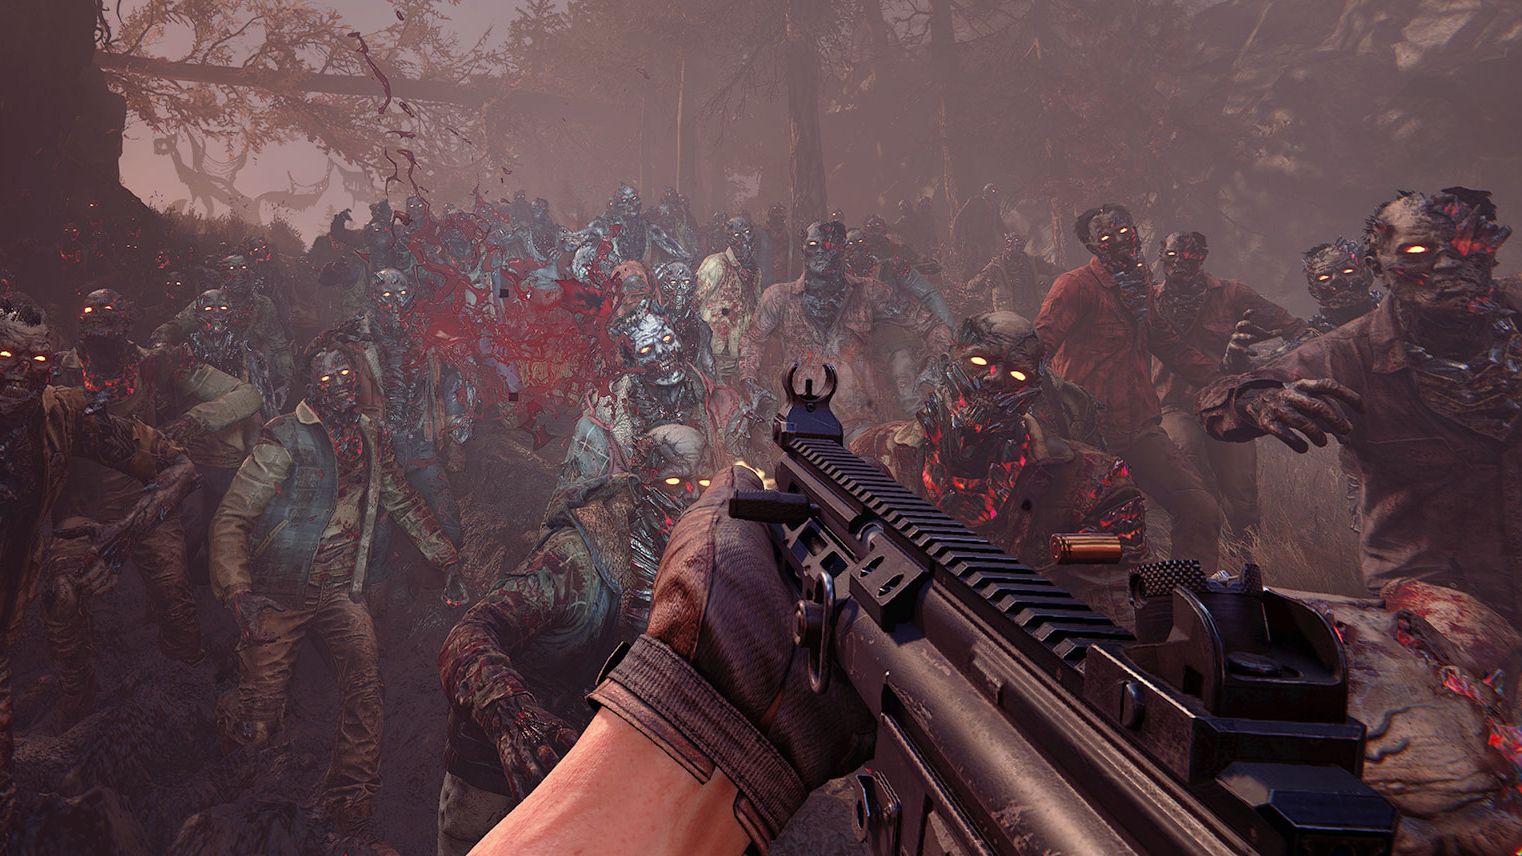 Theres another zombie co-op shooter coming, but this one has John Carpenters name on it Rock Paper Shotgun